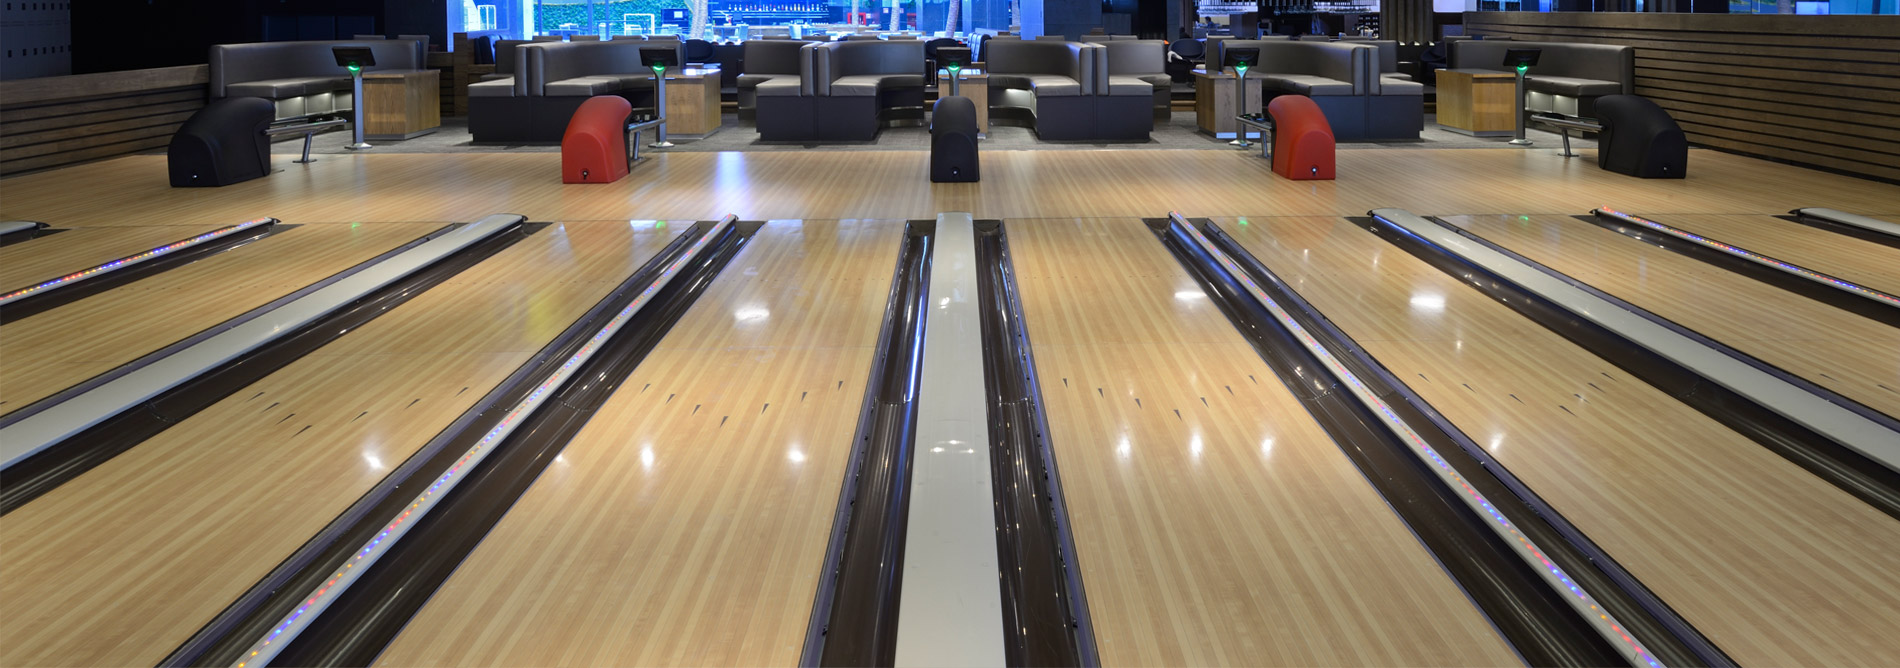 Bowling-QubicaAMF-lanes-spl-Select-features-banner.jpg